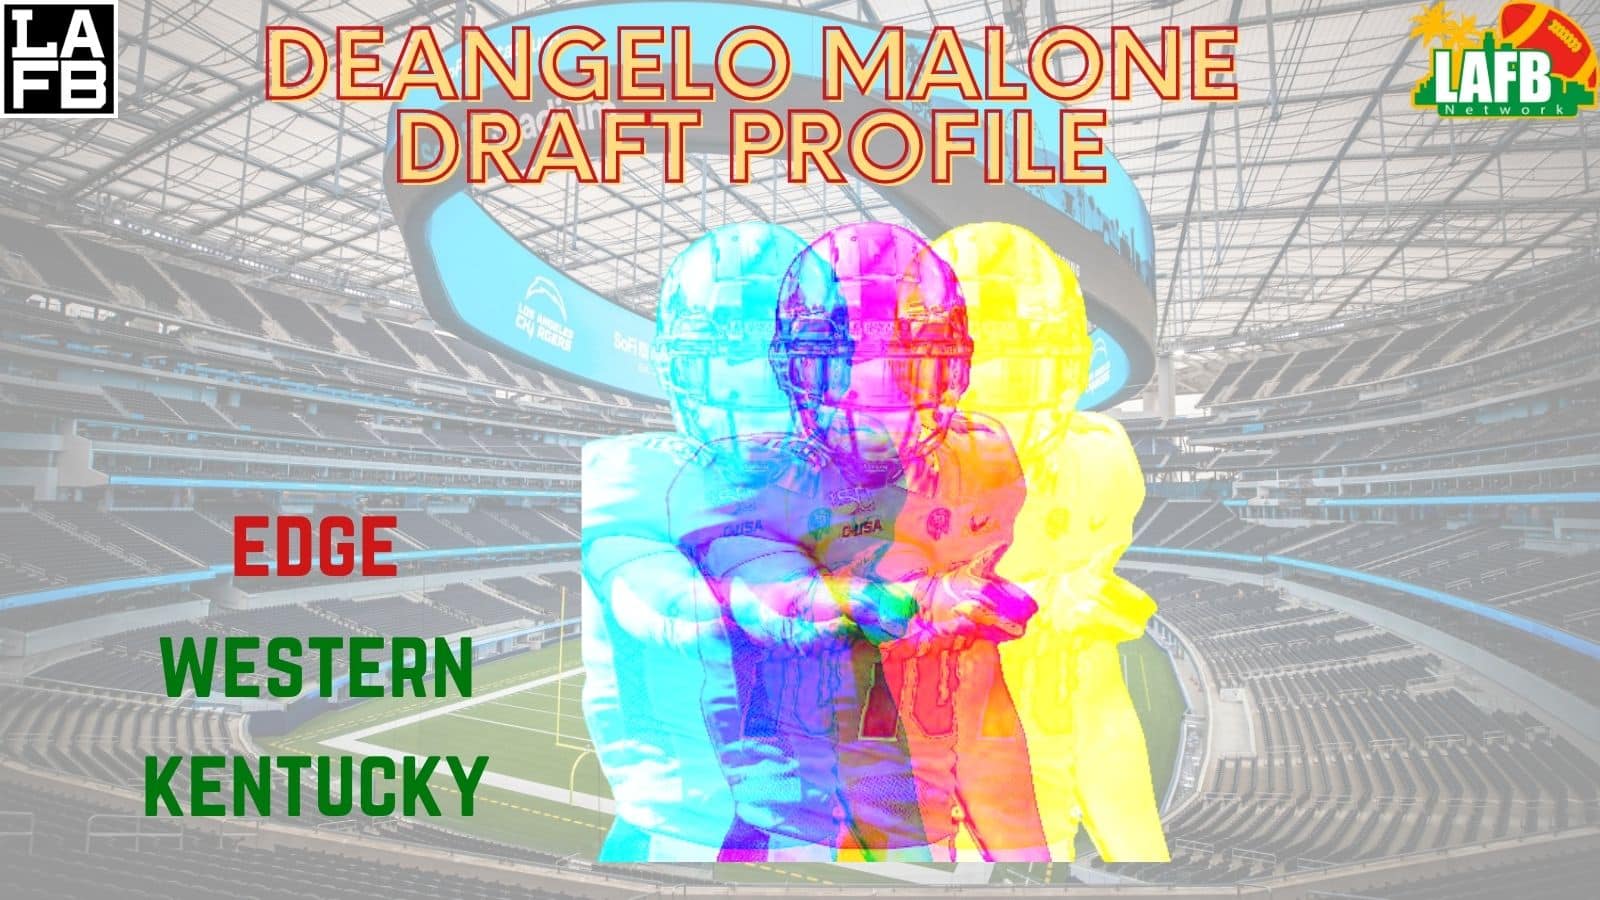 DeAngelo Malone NFL Draft Graphic. Photo Credit: LAFB Network Graphic | Original Photo Featured On NFLDraftDiamonds.com